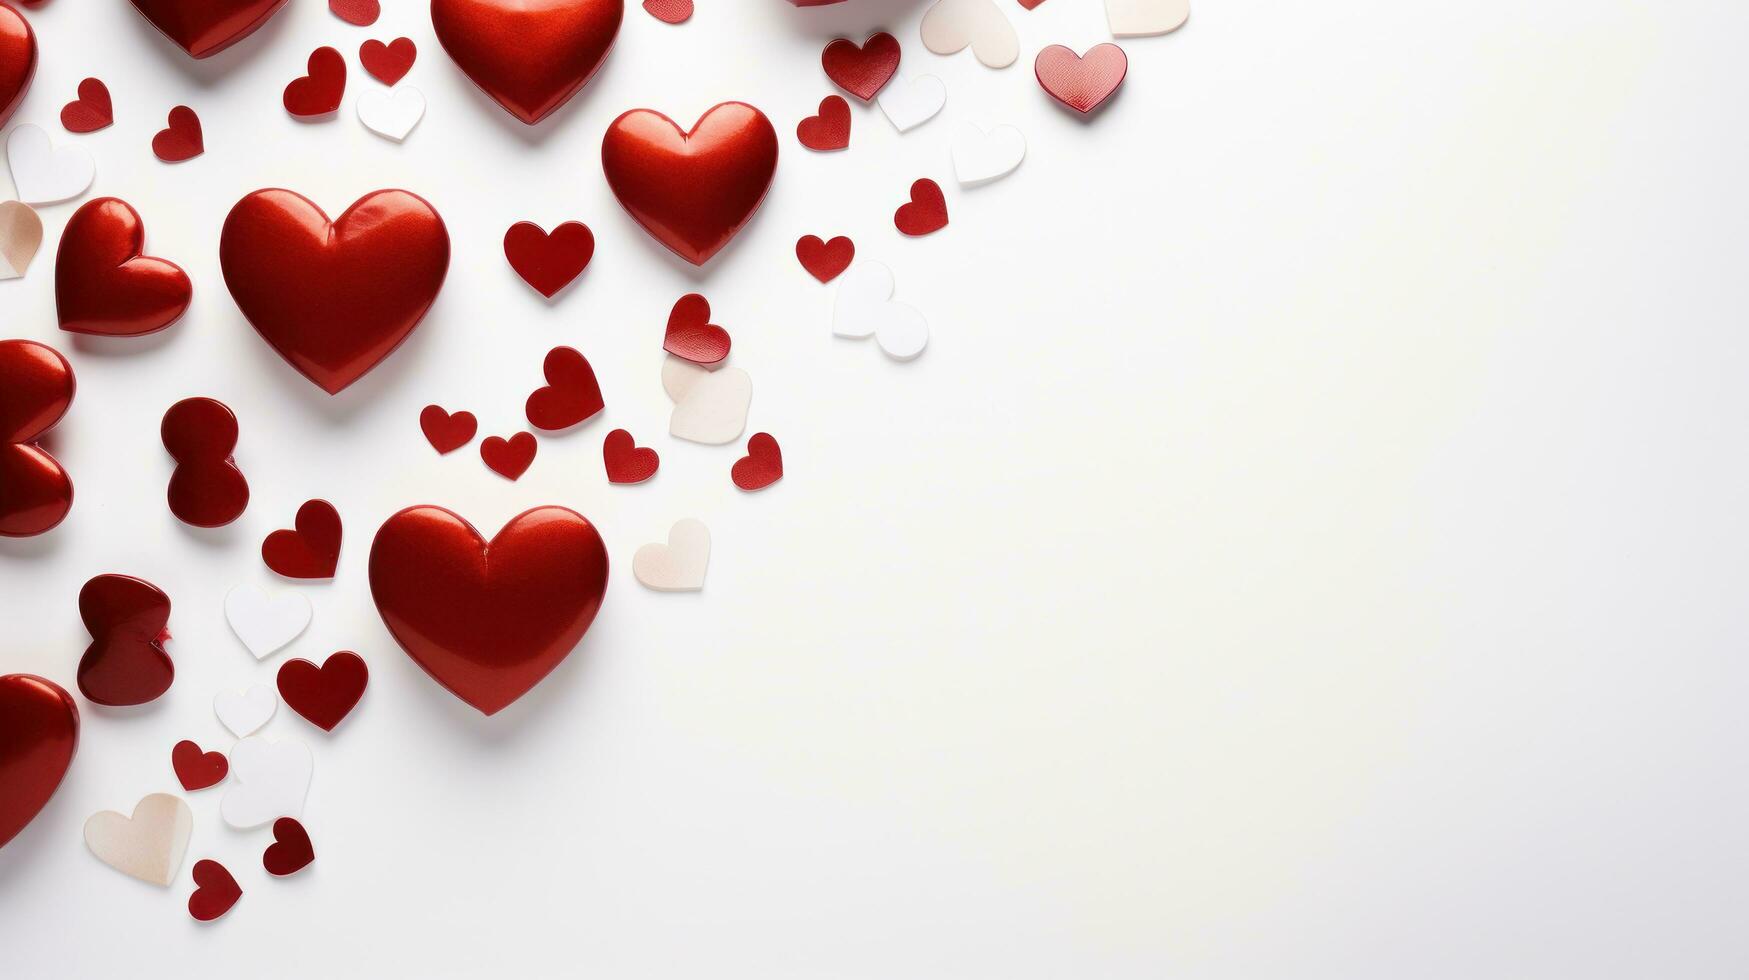 A Lot Of Red Hearts On A White Background With Free Space Stock Photo -  Download Image Now - iStock